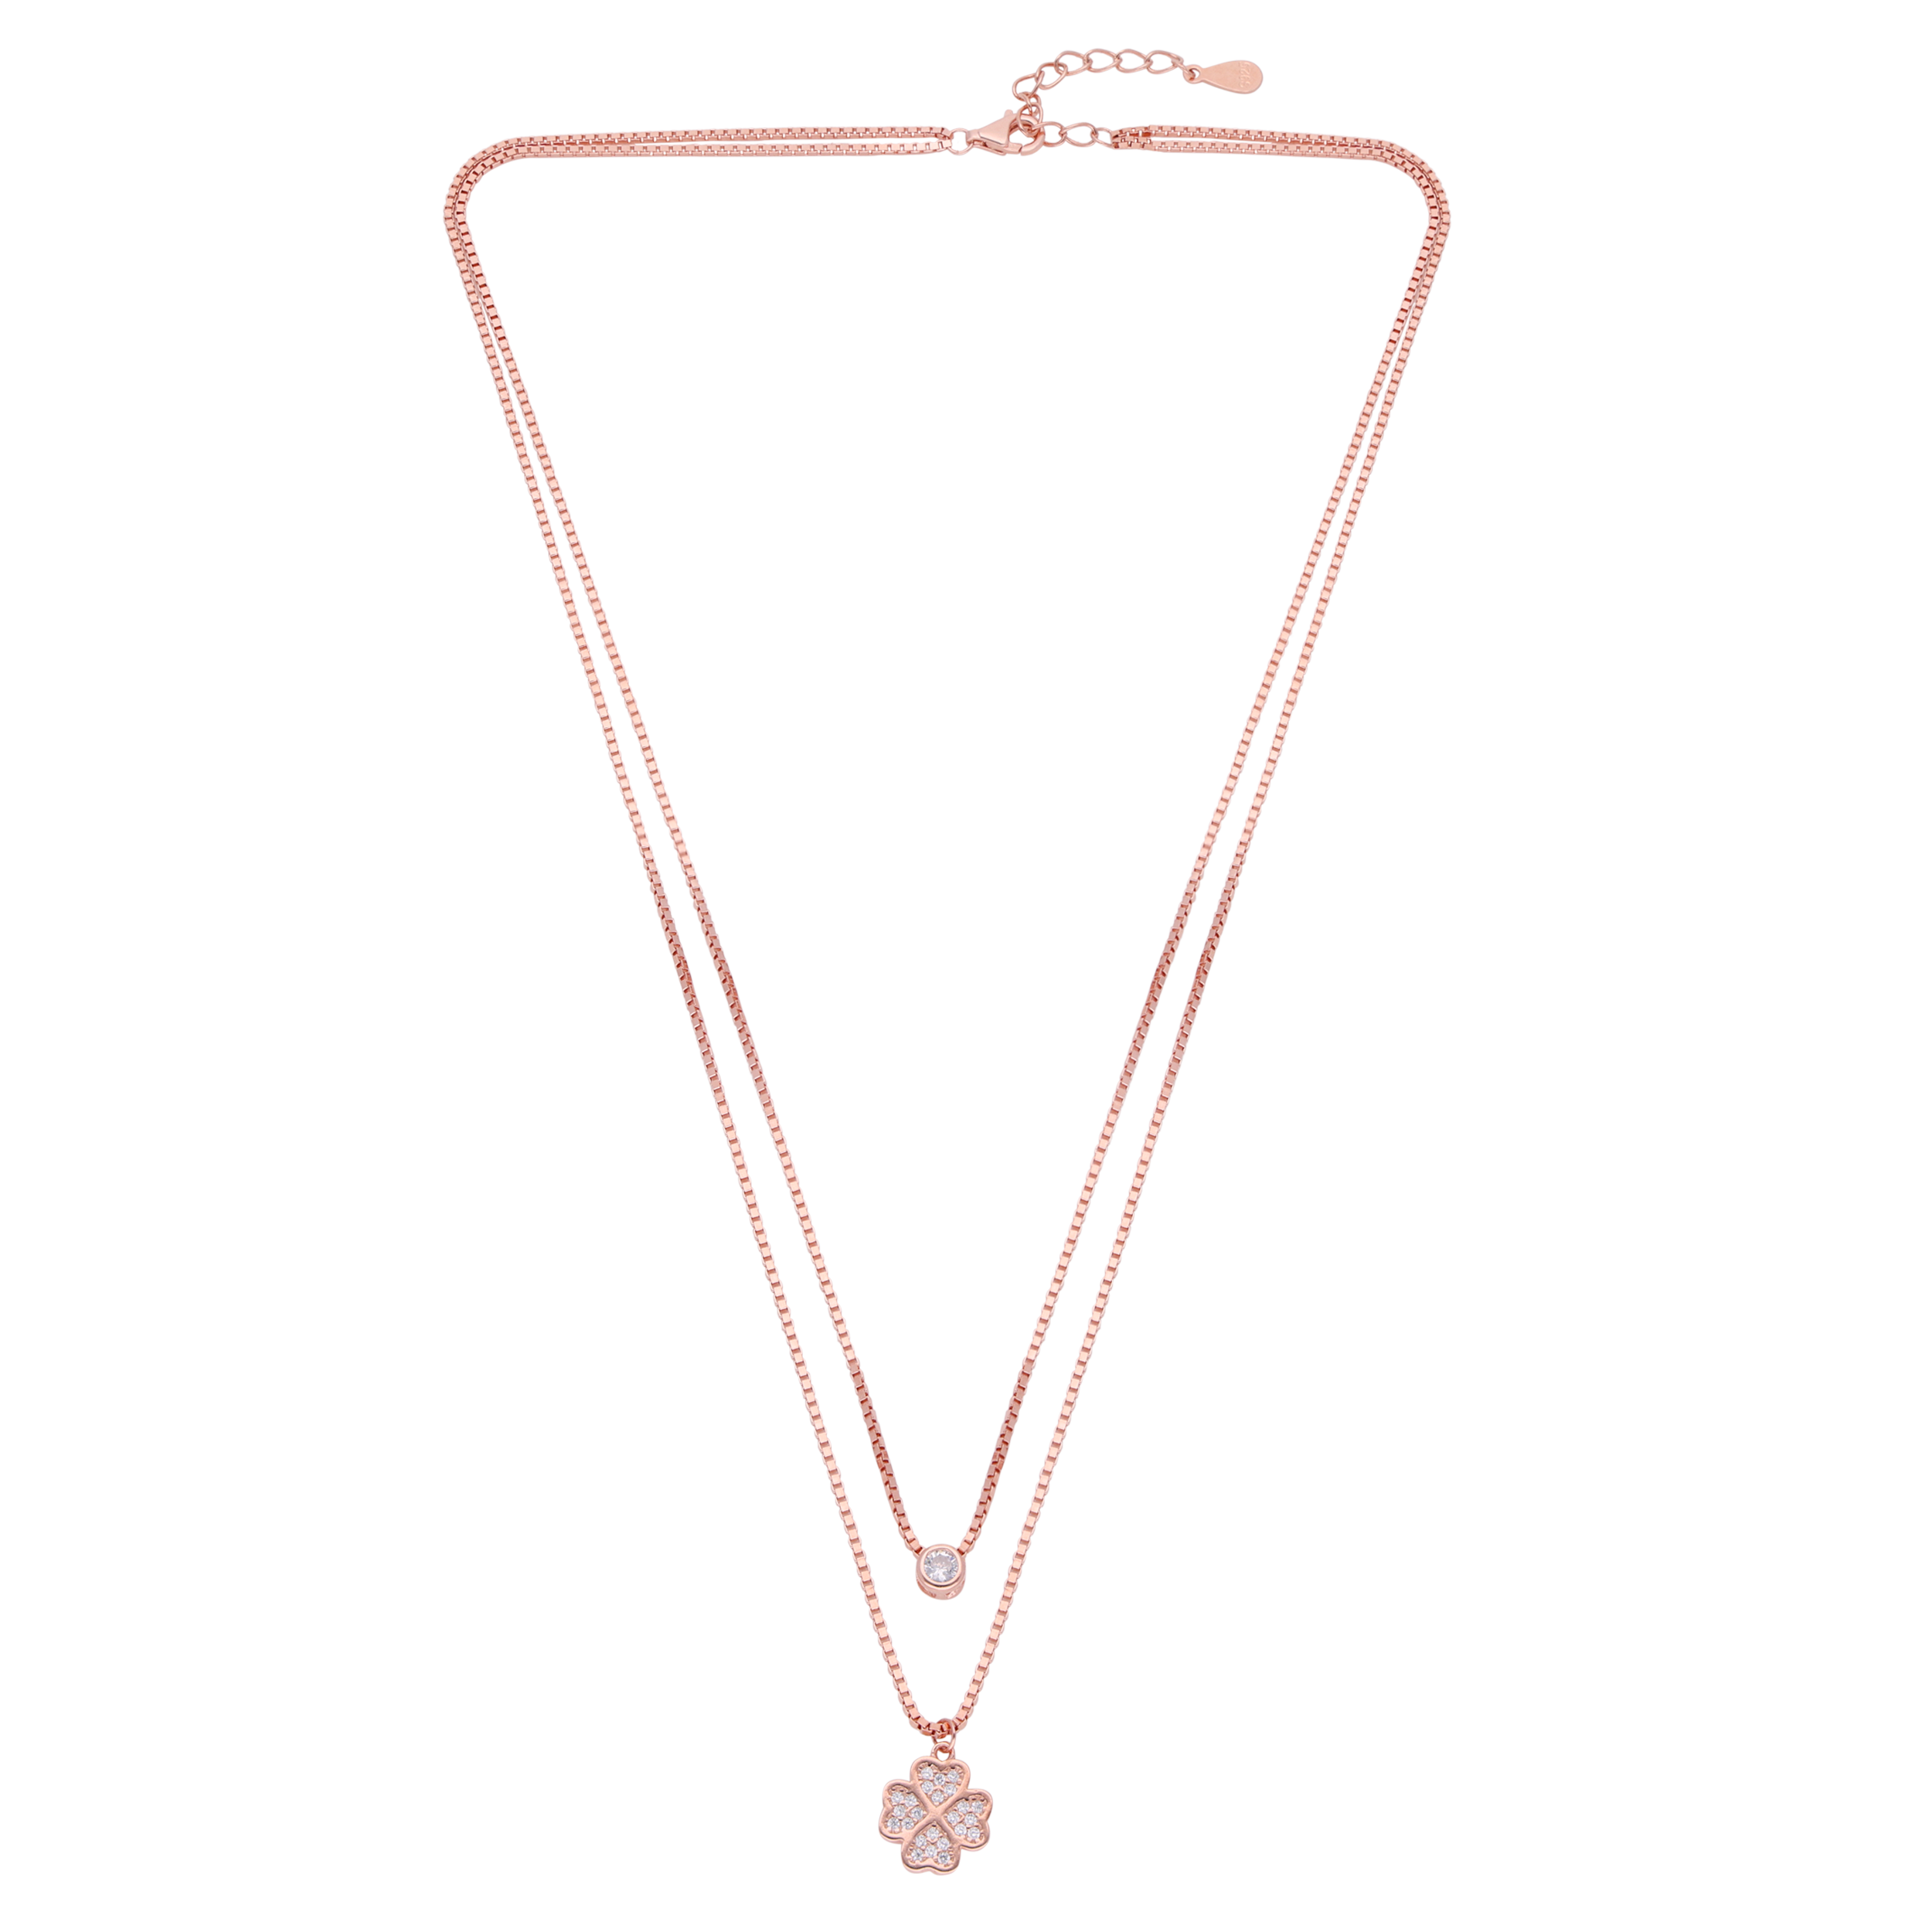 "Blooming Beauty: Rose Gold Layered Silver Chain | SKU: 0019281896, 0019282039, 0019282060